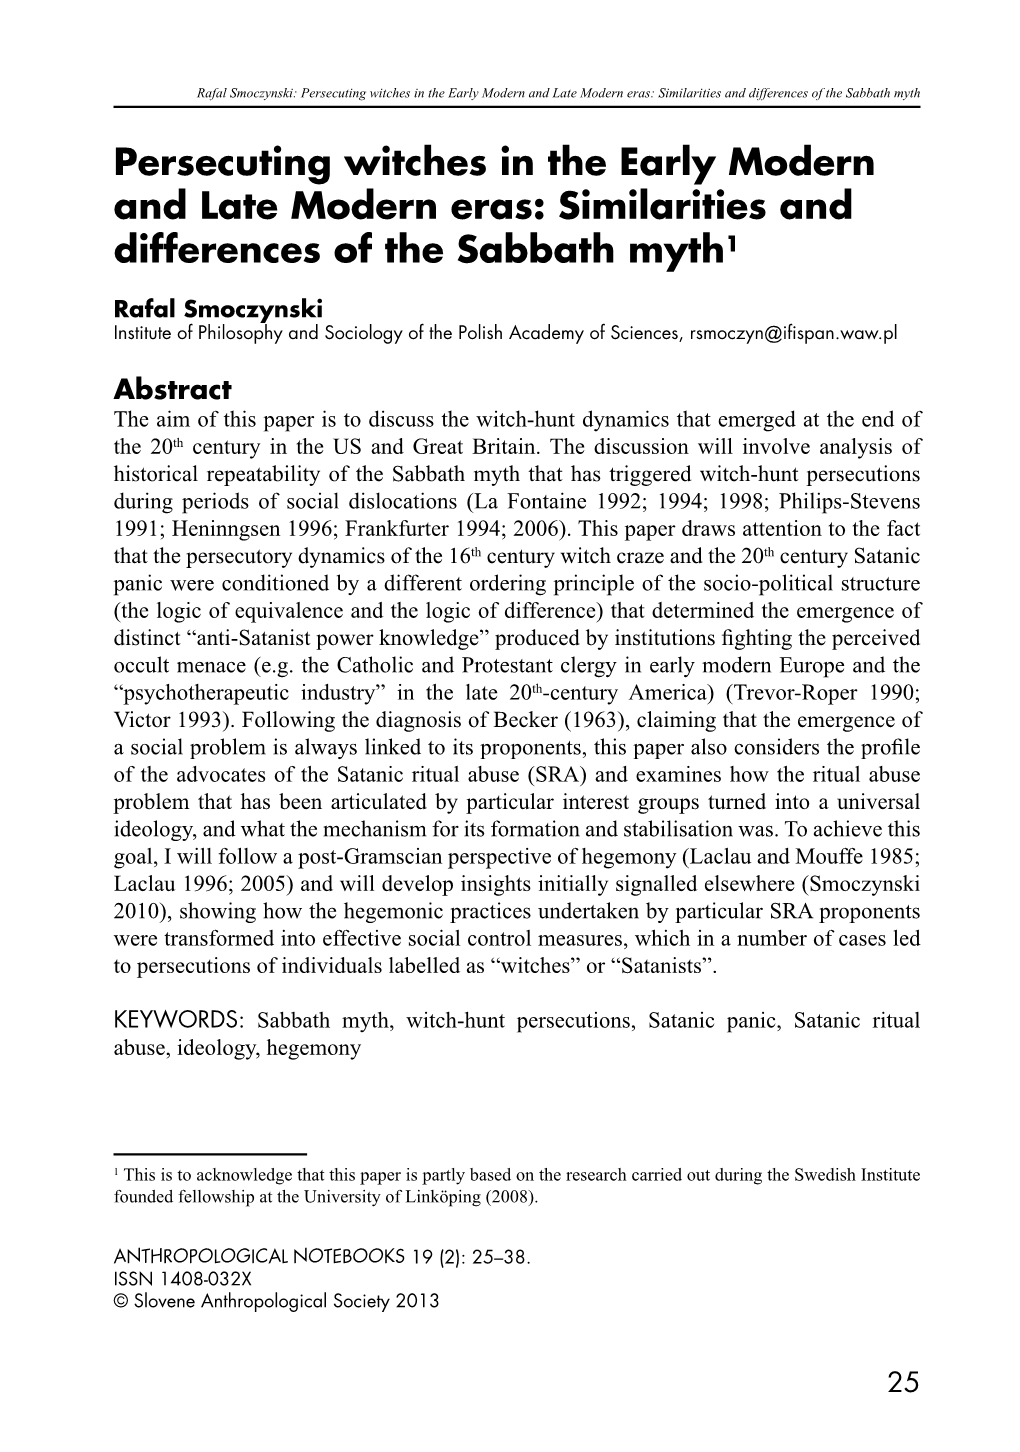 Persecuting Witches in the Early Modern and Late Modern Eras: Similarities and Differences of the Sabbath Myth